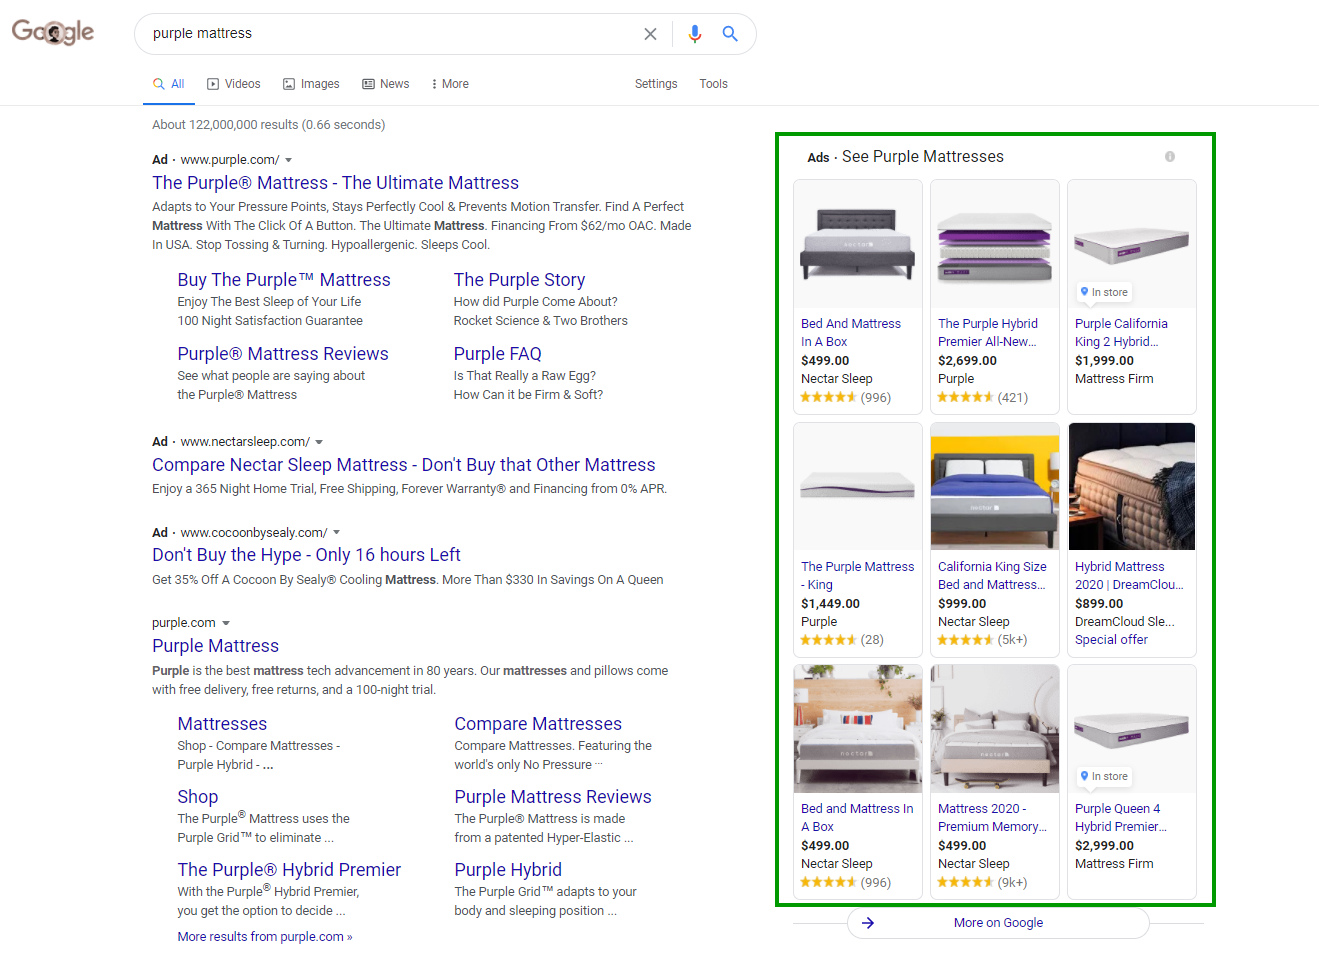 Google Shopping ads appearing in the right hand corner of search results